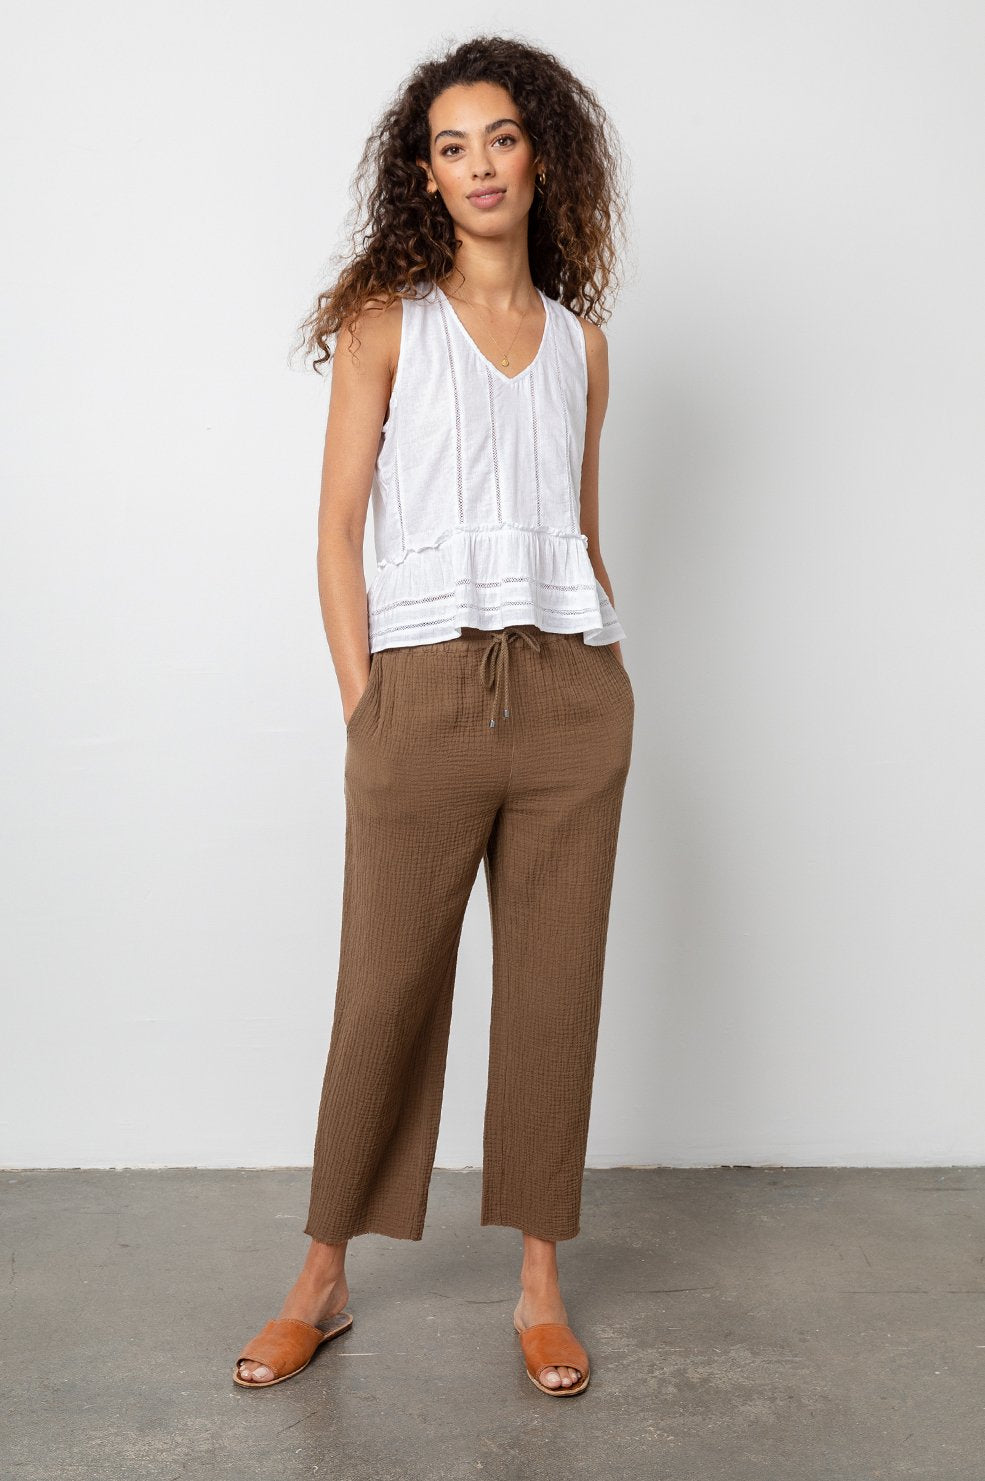 Agnes Pant - Canteen - Kingfisher Road - Online Boutique